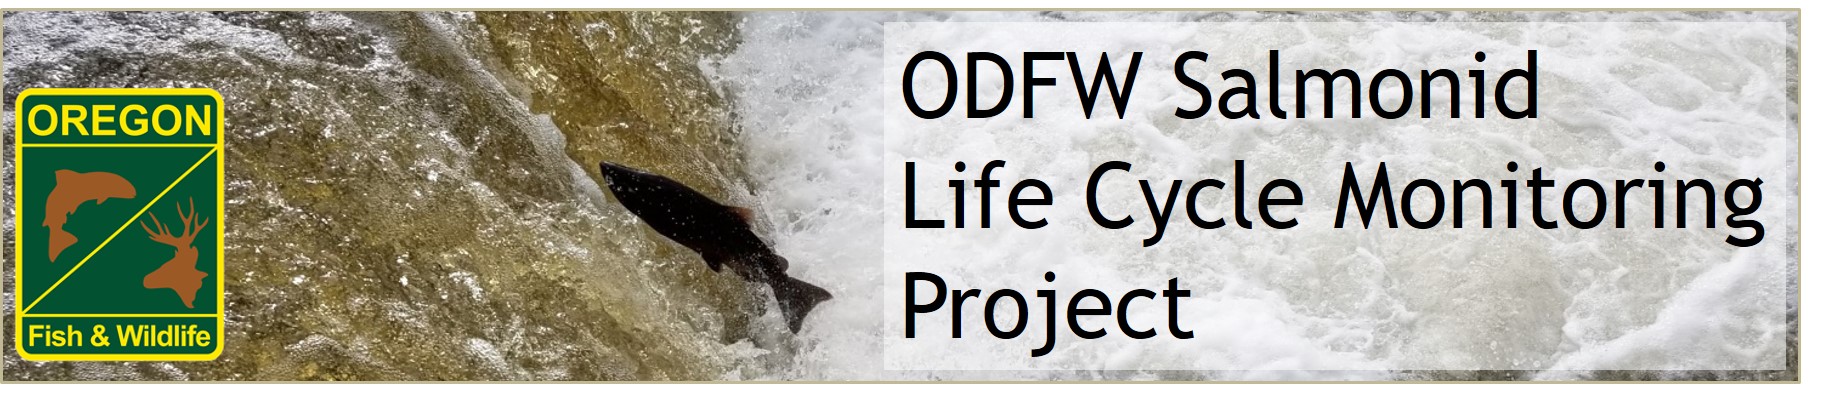 ODFW Salmonid Life Cycle Monitoring Project